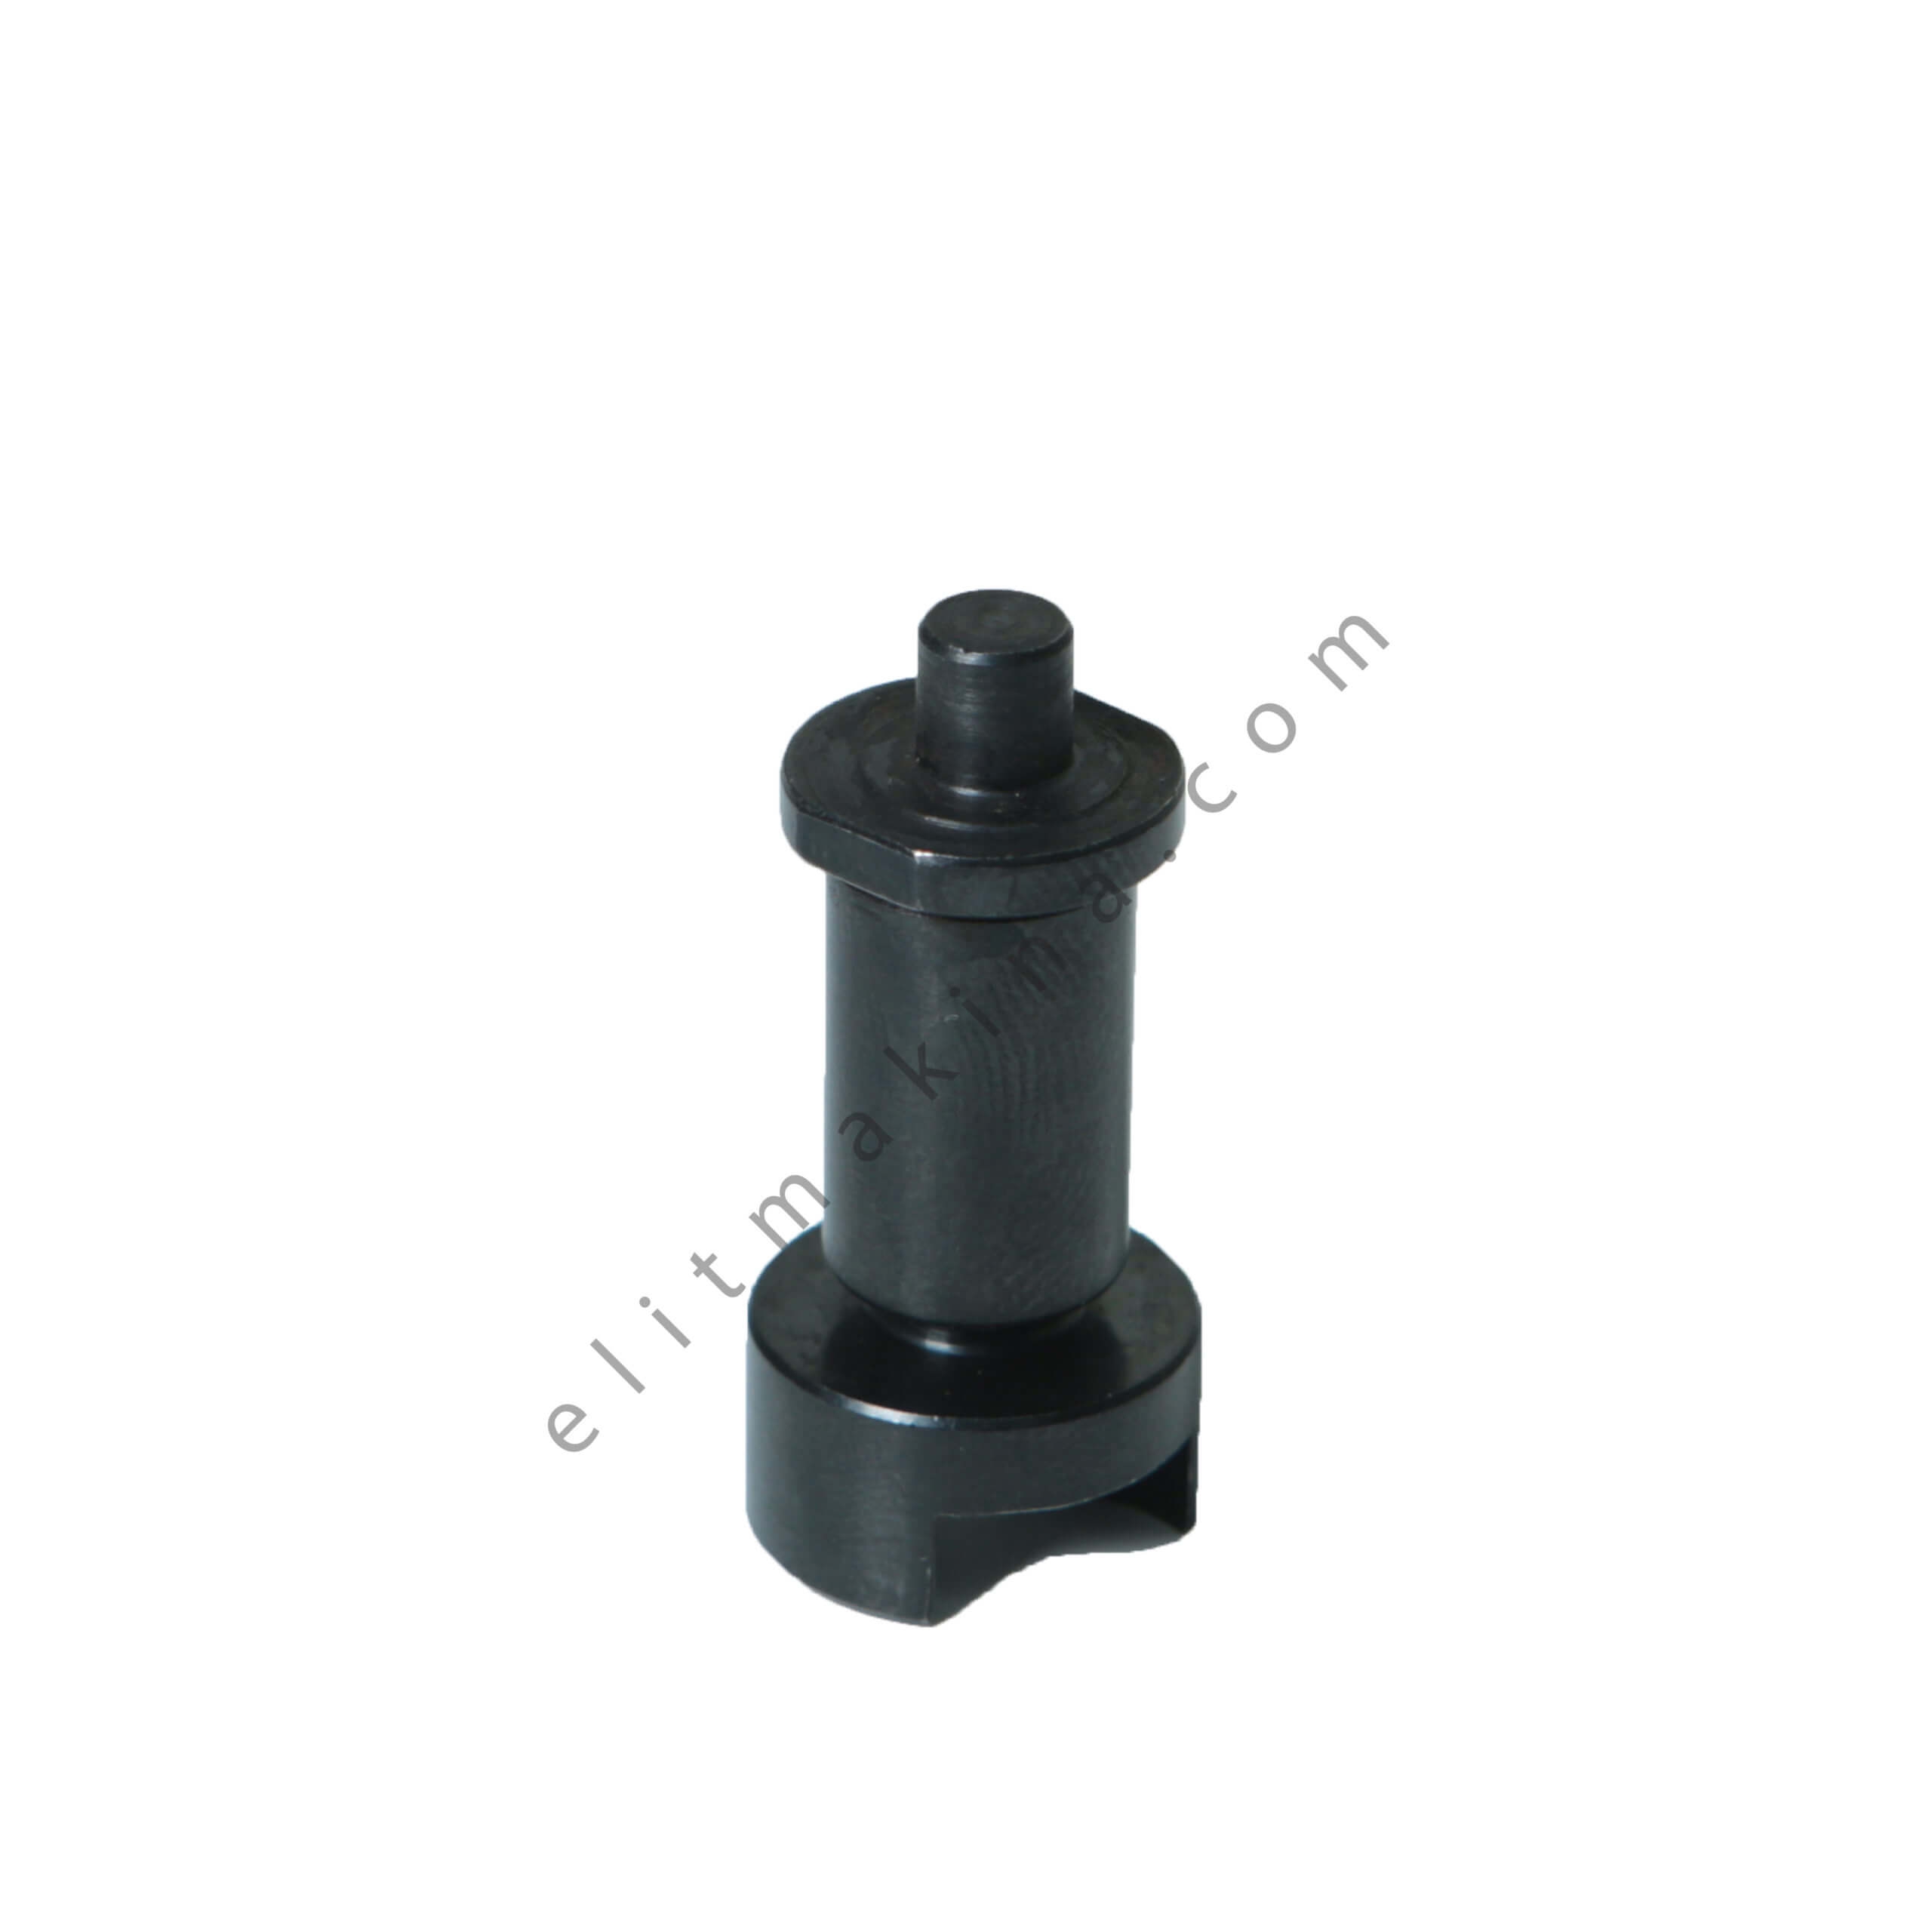 Atom 01030817 Special Bearing Shaft Part For Electric Chuck